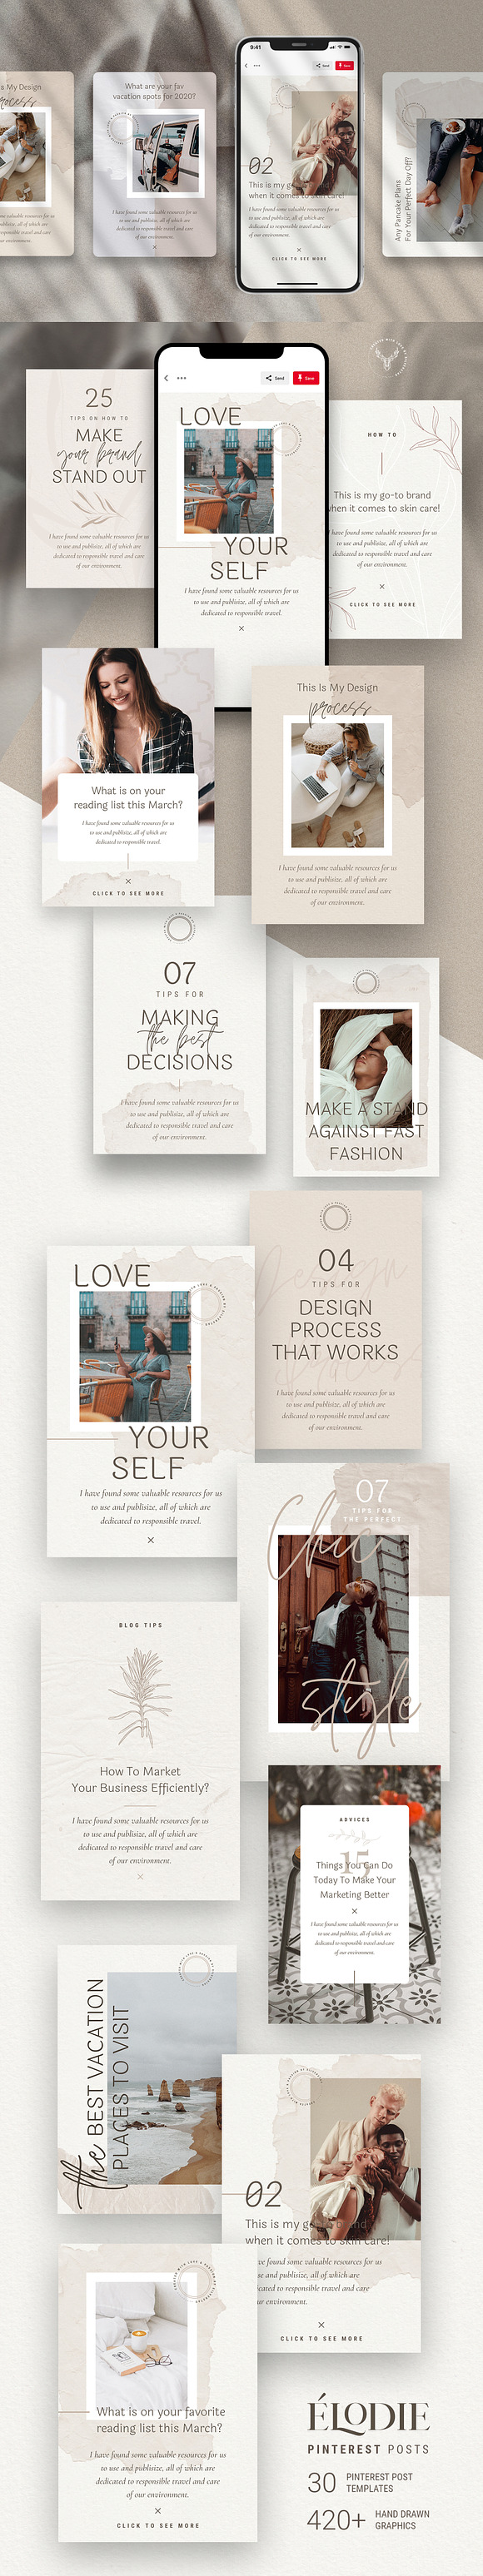 Elodie - Canva Pinterest Templates in Pinterest Templates - product preview 2